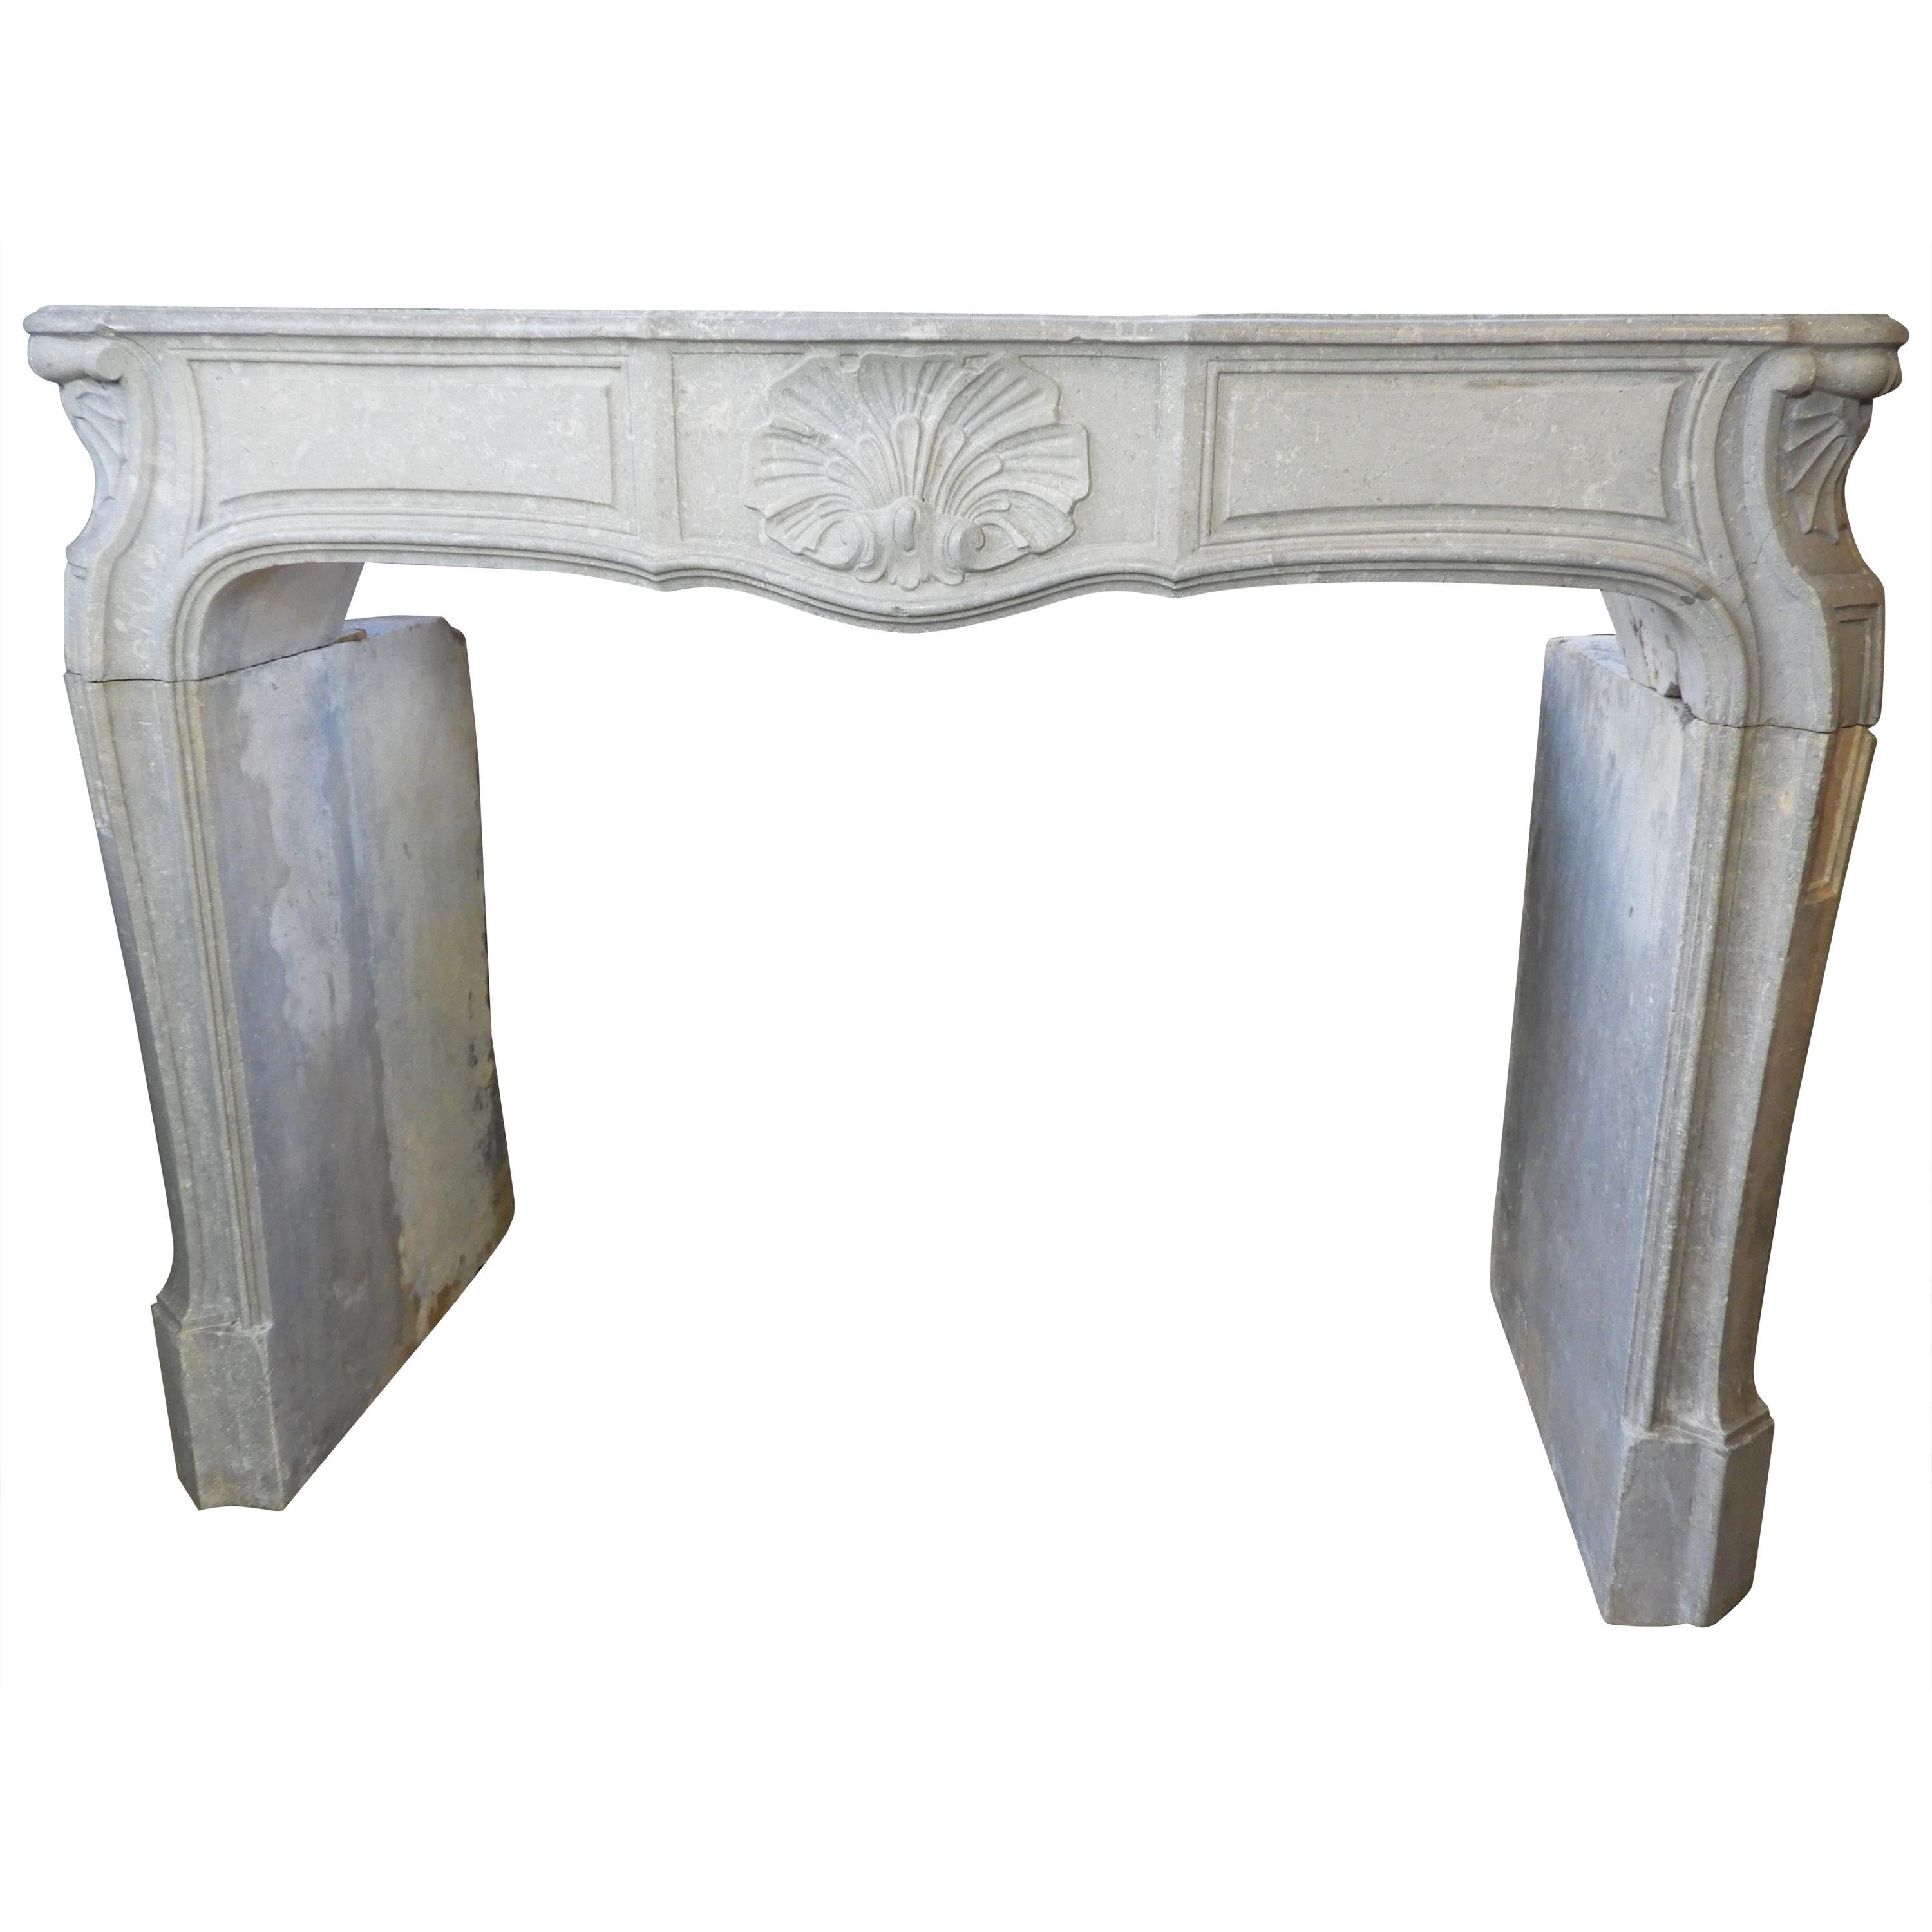 19th Century Louis XV Style Louis 15th Fireplace in Grey French Limestone For Sale